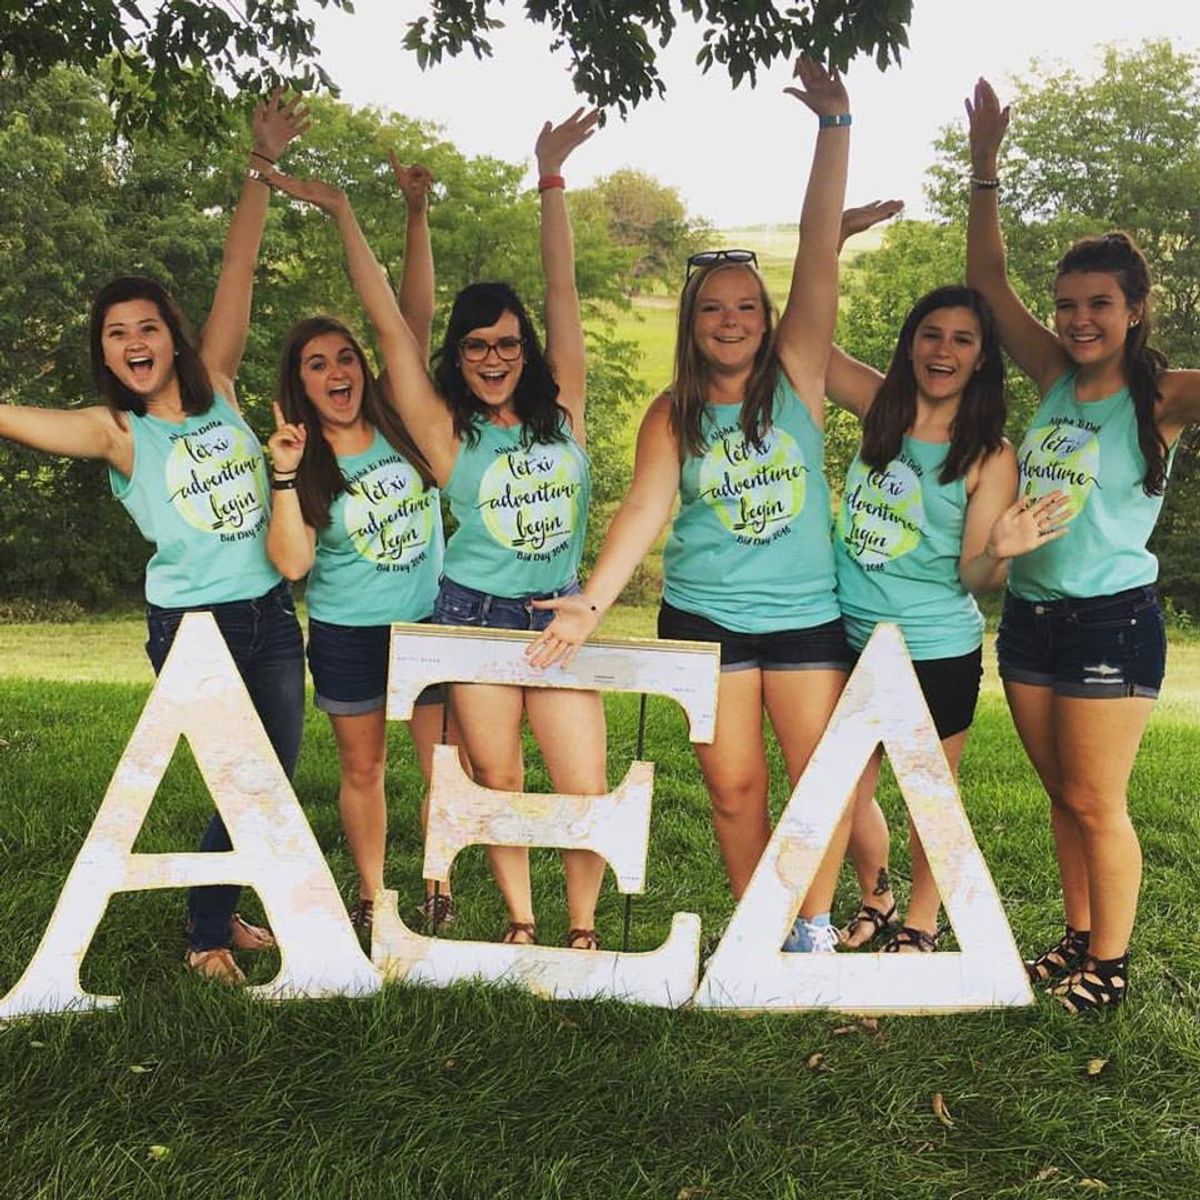 5 Thoughts From A Recent Sorority Alumna